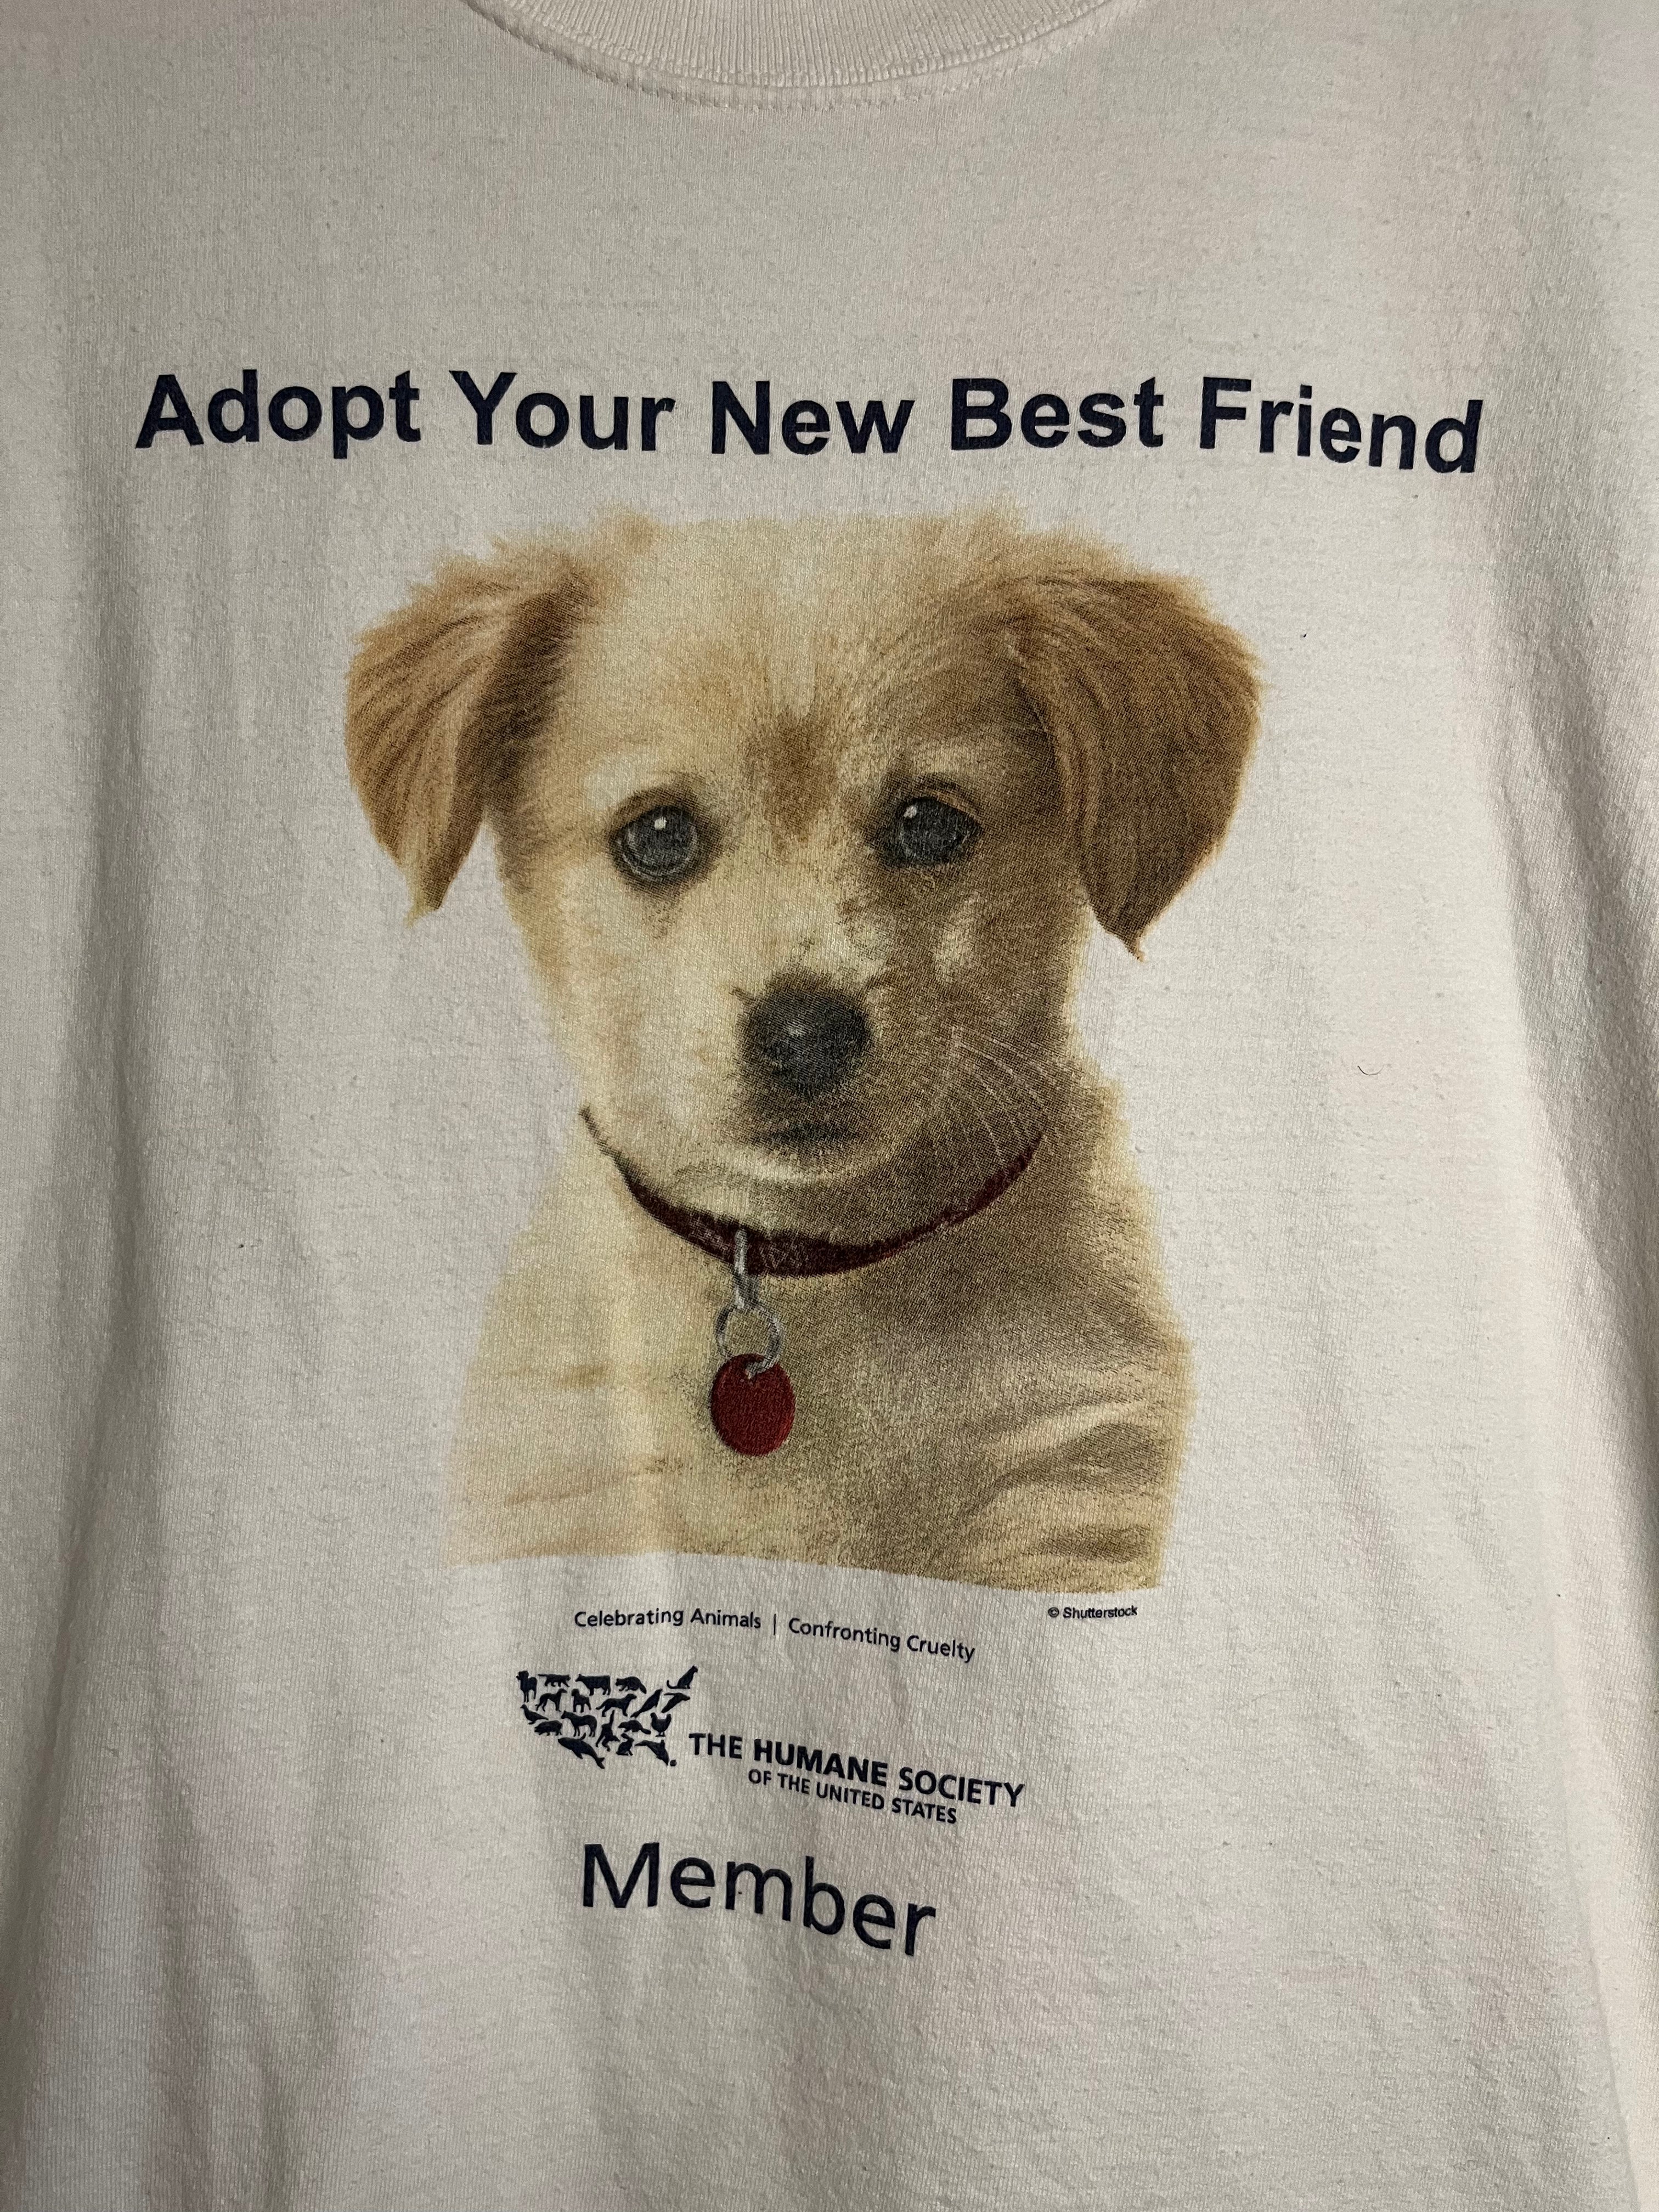 Puppy Eyes ‘Adopt Your New Best Friend’ Humane Society Vintage T-Shirt - White/Off-White - L/XL